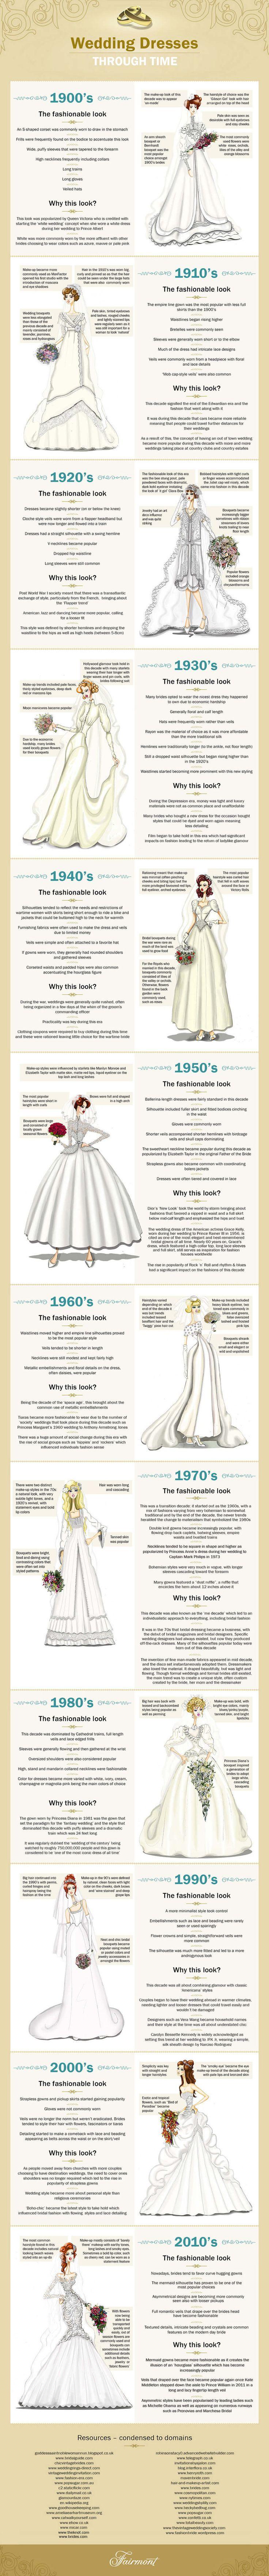 Hochzeit - Here's A Graphic Of How Much Wedding Dresses Have Changed In A Century